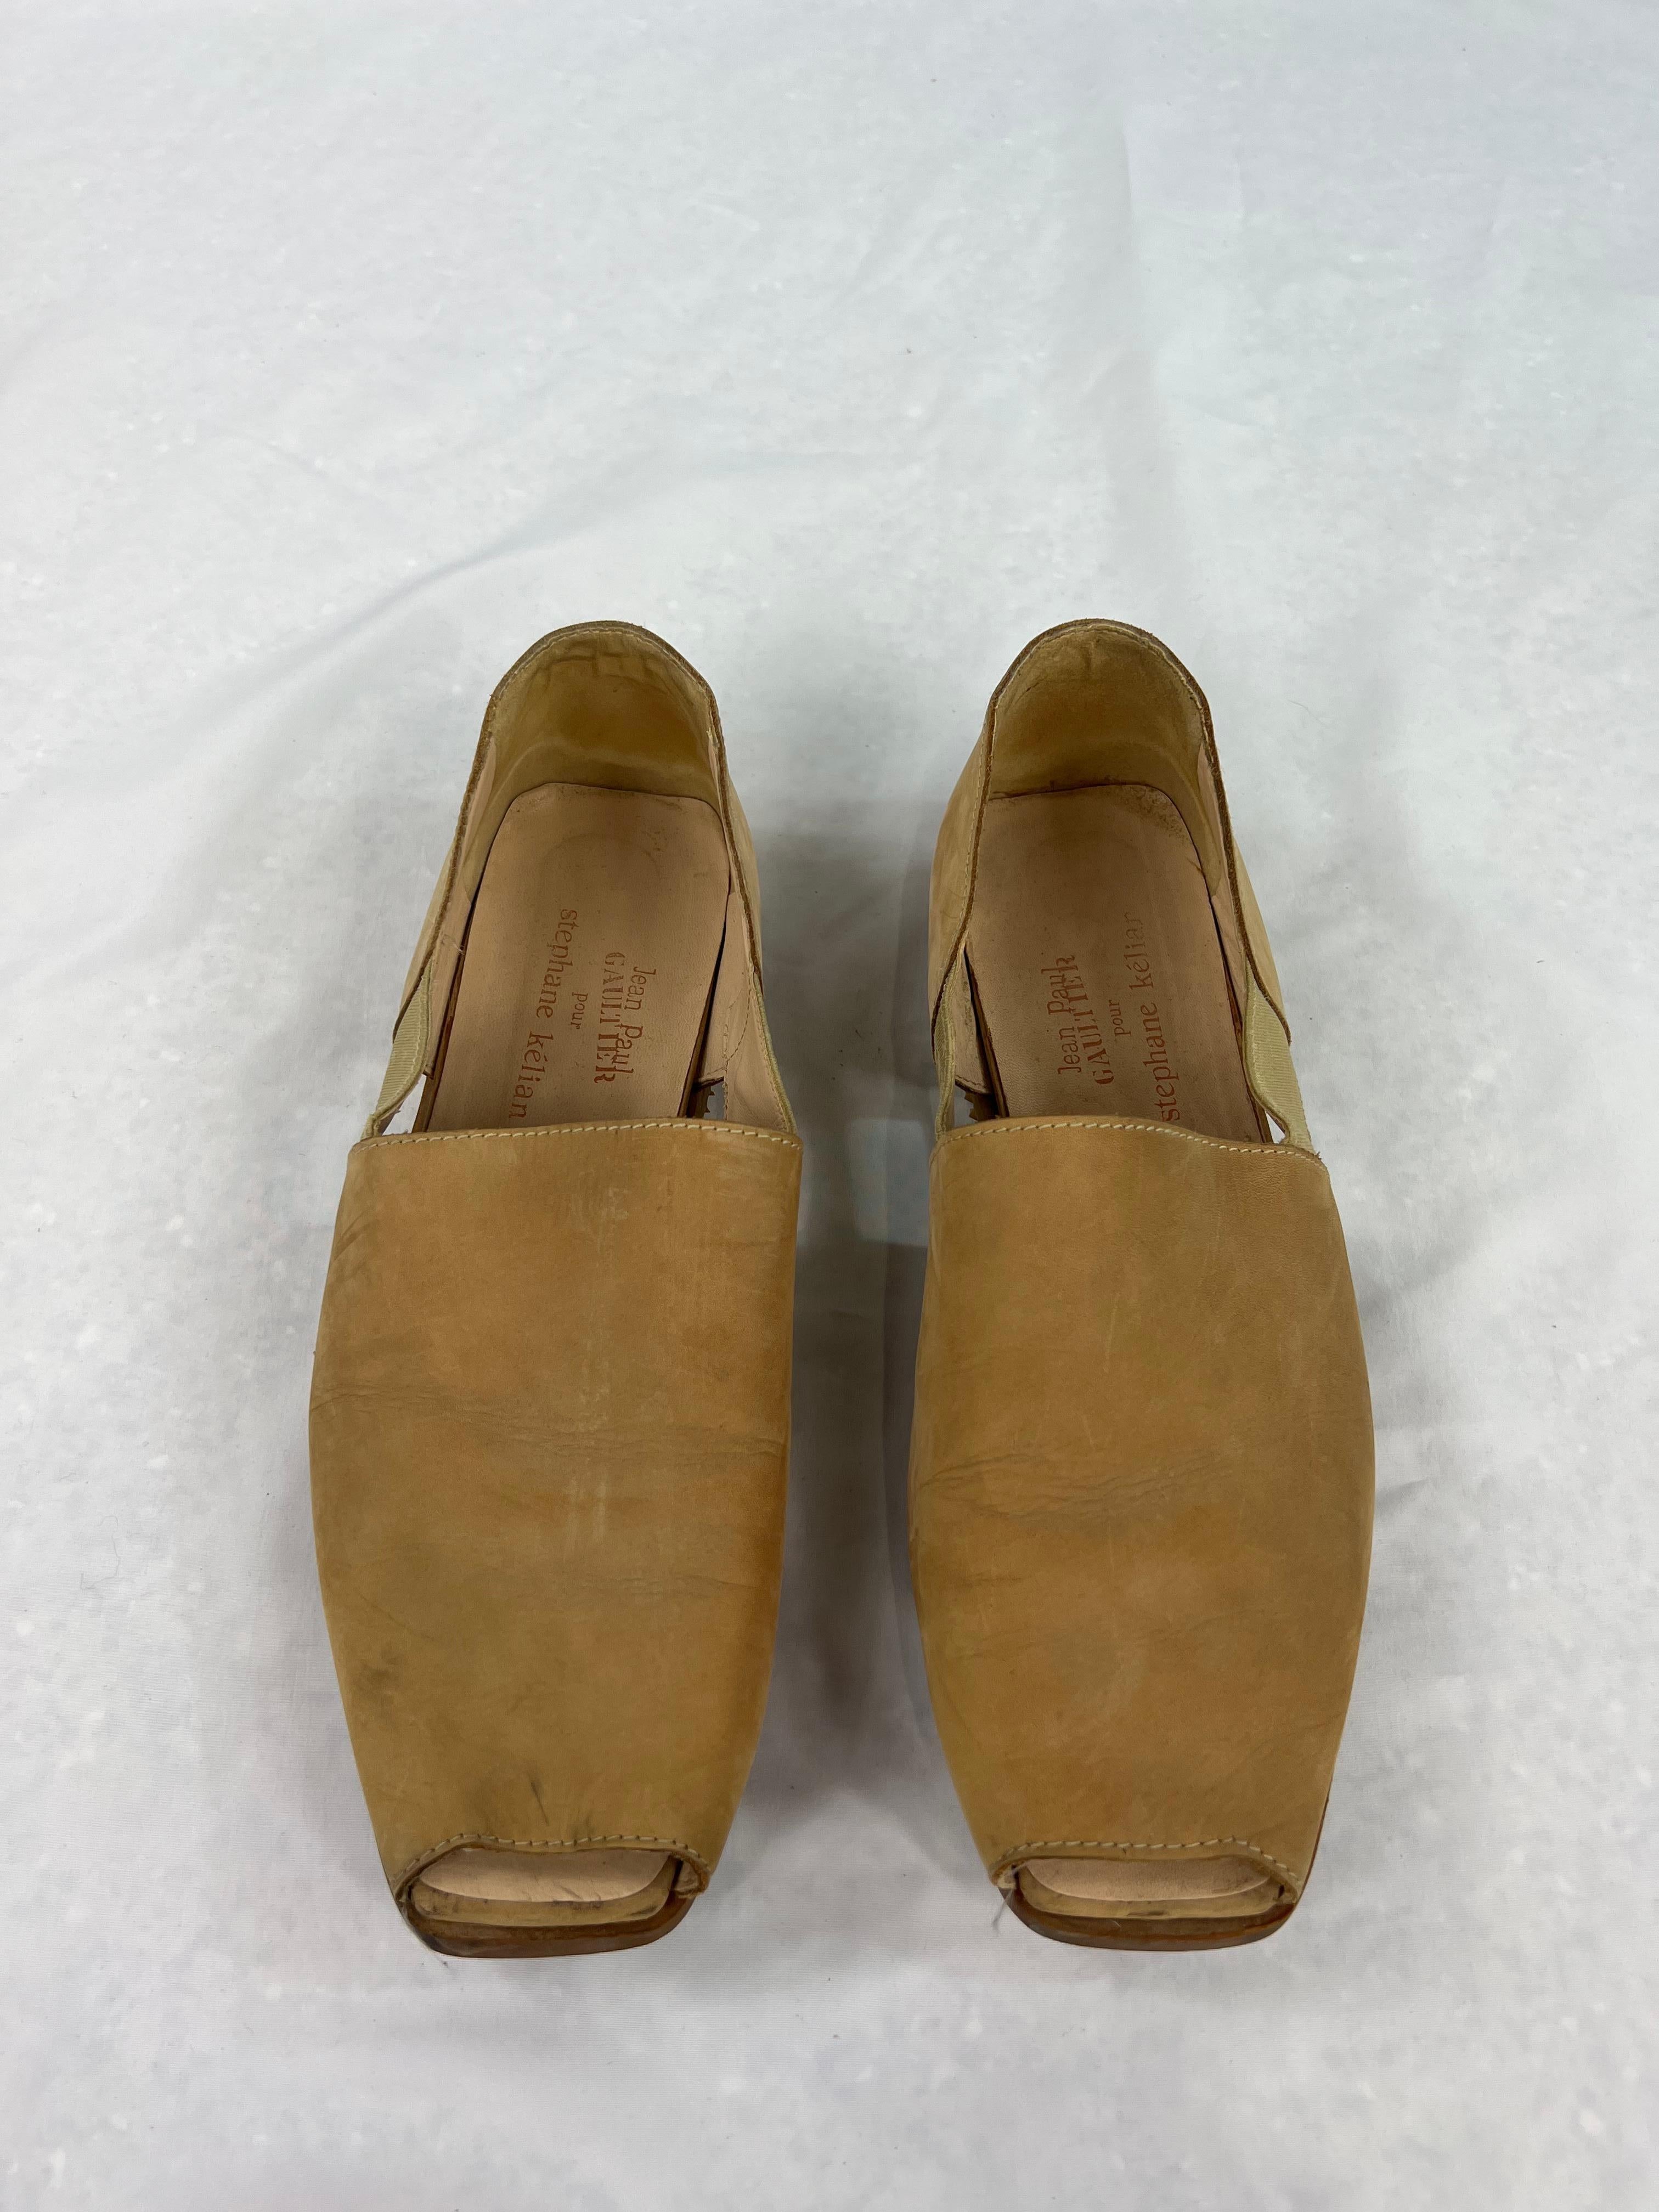 Product details:

The shoes feature camel/ tan color, open toe with side elastic detail and flat style.